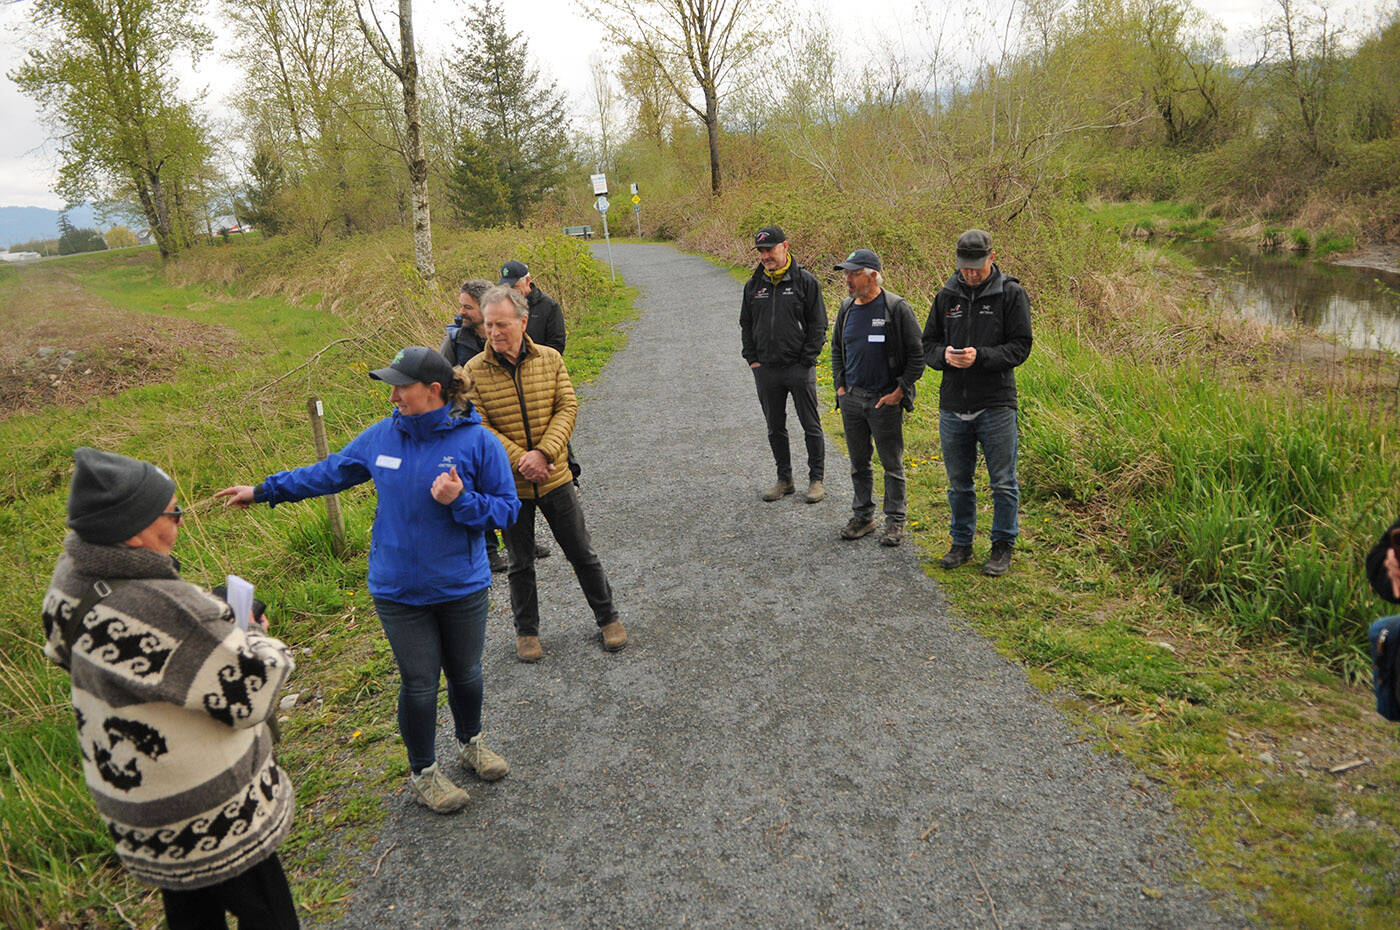 Natasha Cox with Fraser Valley Watersheds Coalition (blue coat) takes folks on a tour of Hooge Wetlands in Chilliwack on Thursday, April 21, 2022. To the left is a channel that was built in 2017 that connects with Peach Creek (at right) and runs through the wetlands. (Jenna Hauck/ Chilliwack Progress)